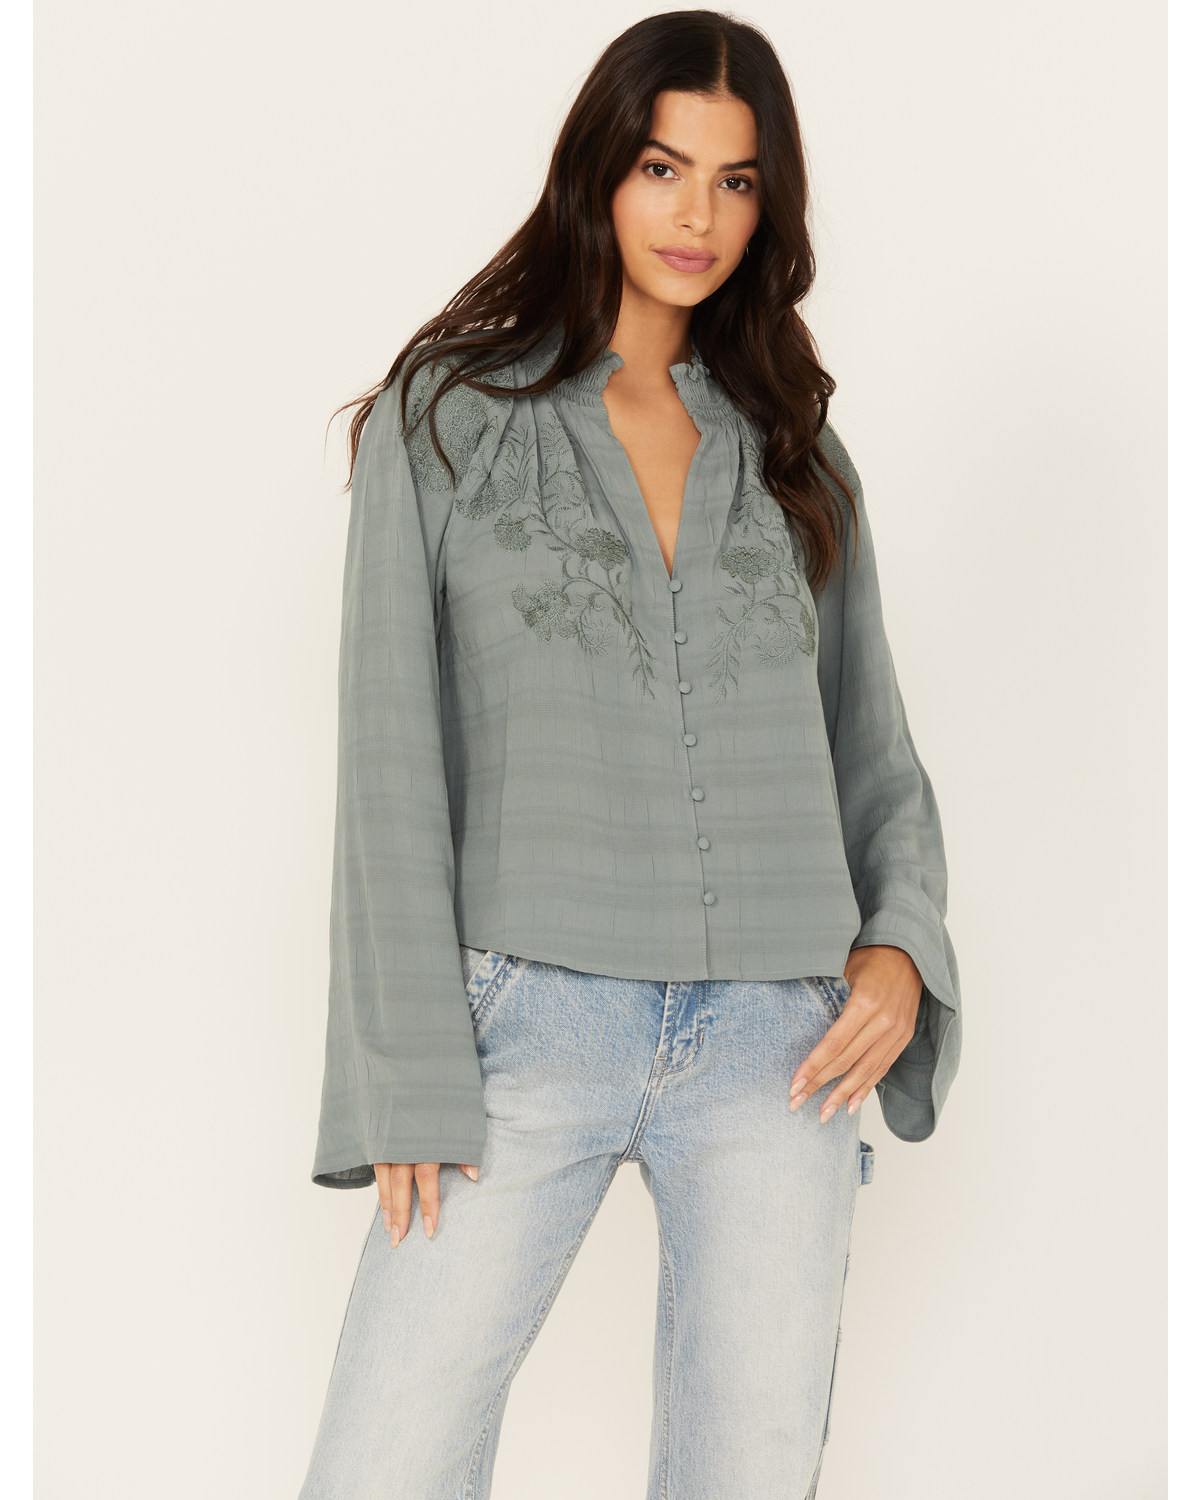 Cleo + Wolf Women's Cropped Button-Down Blouse